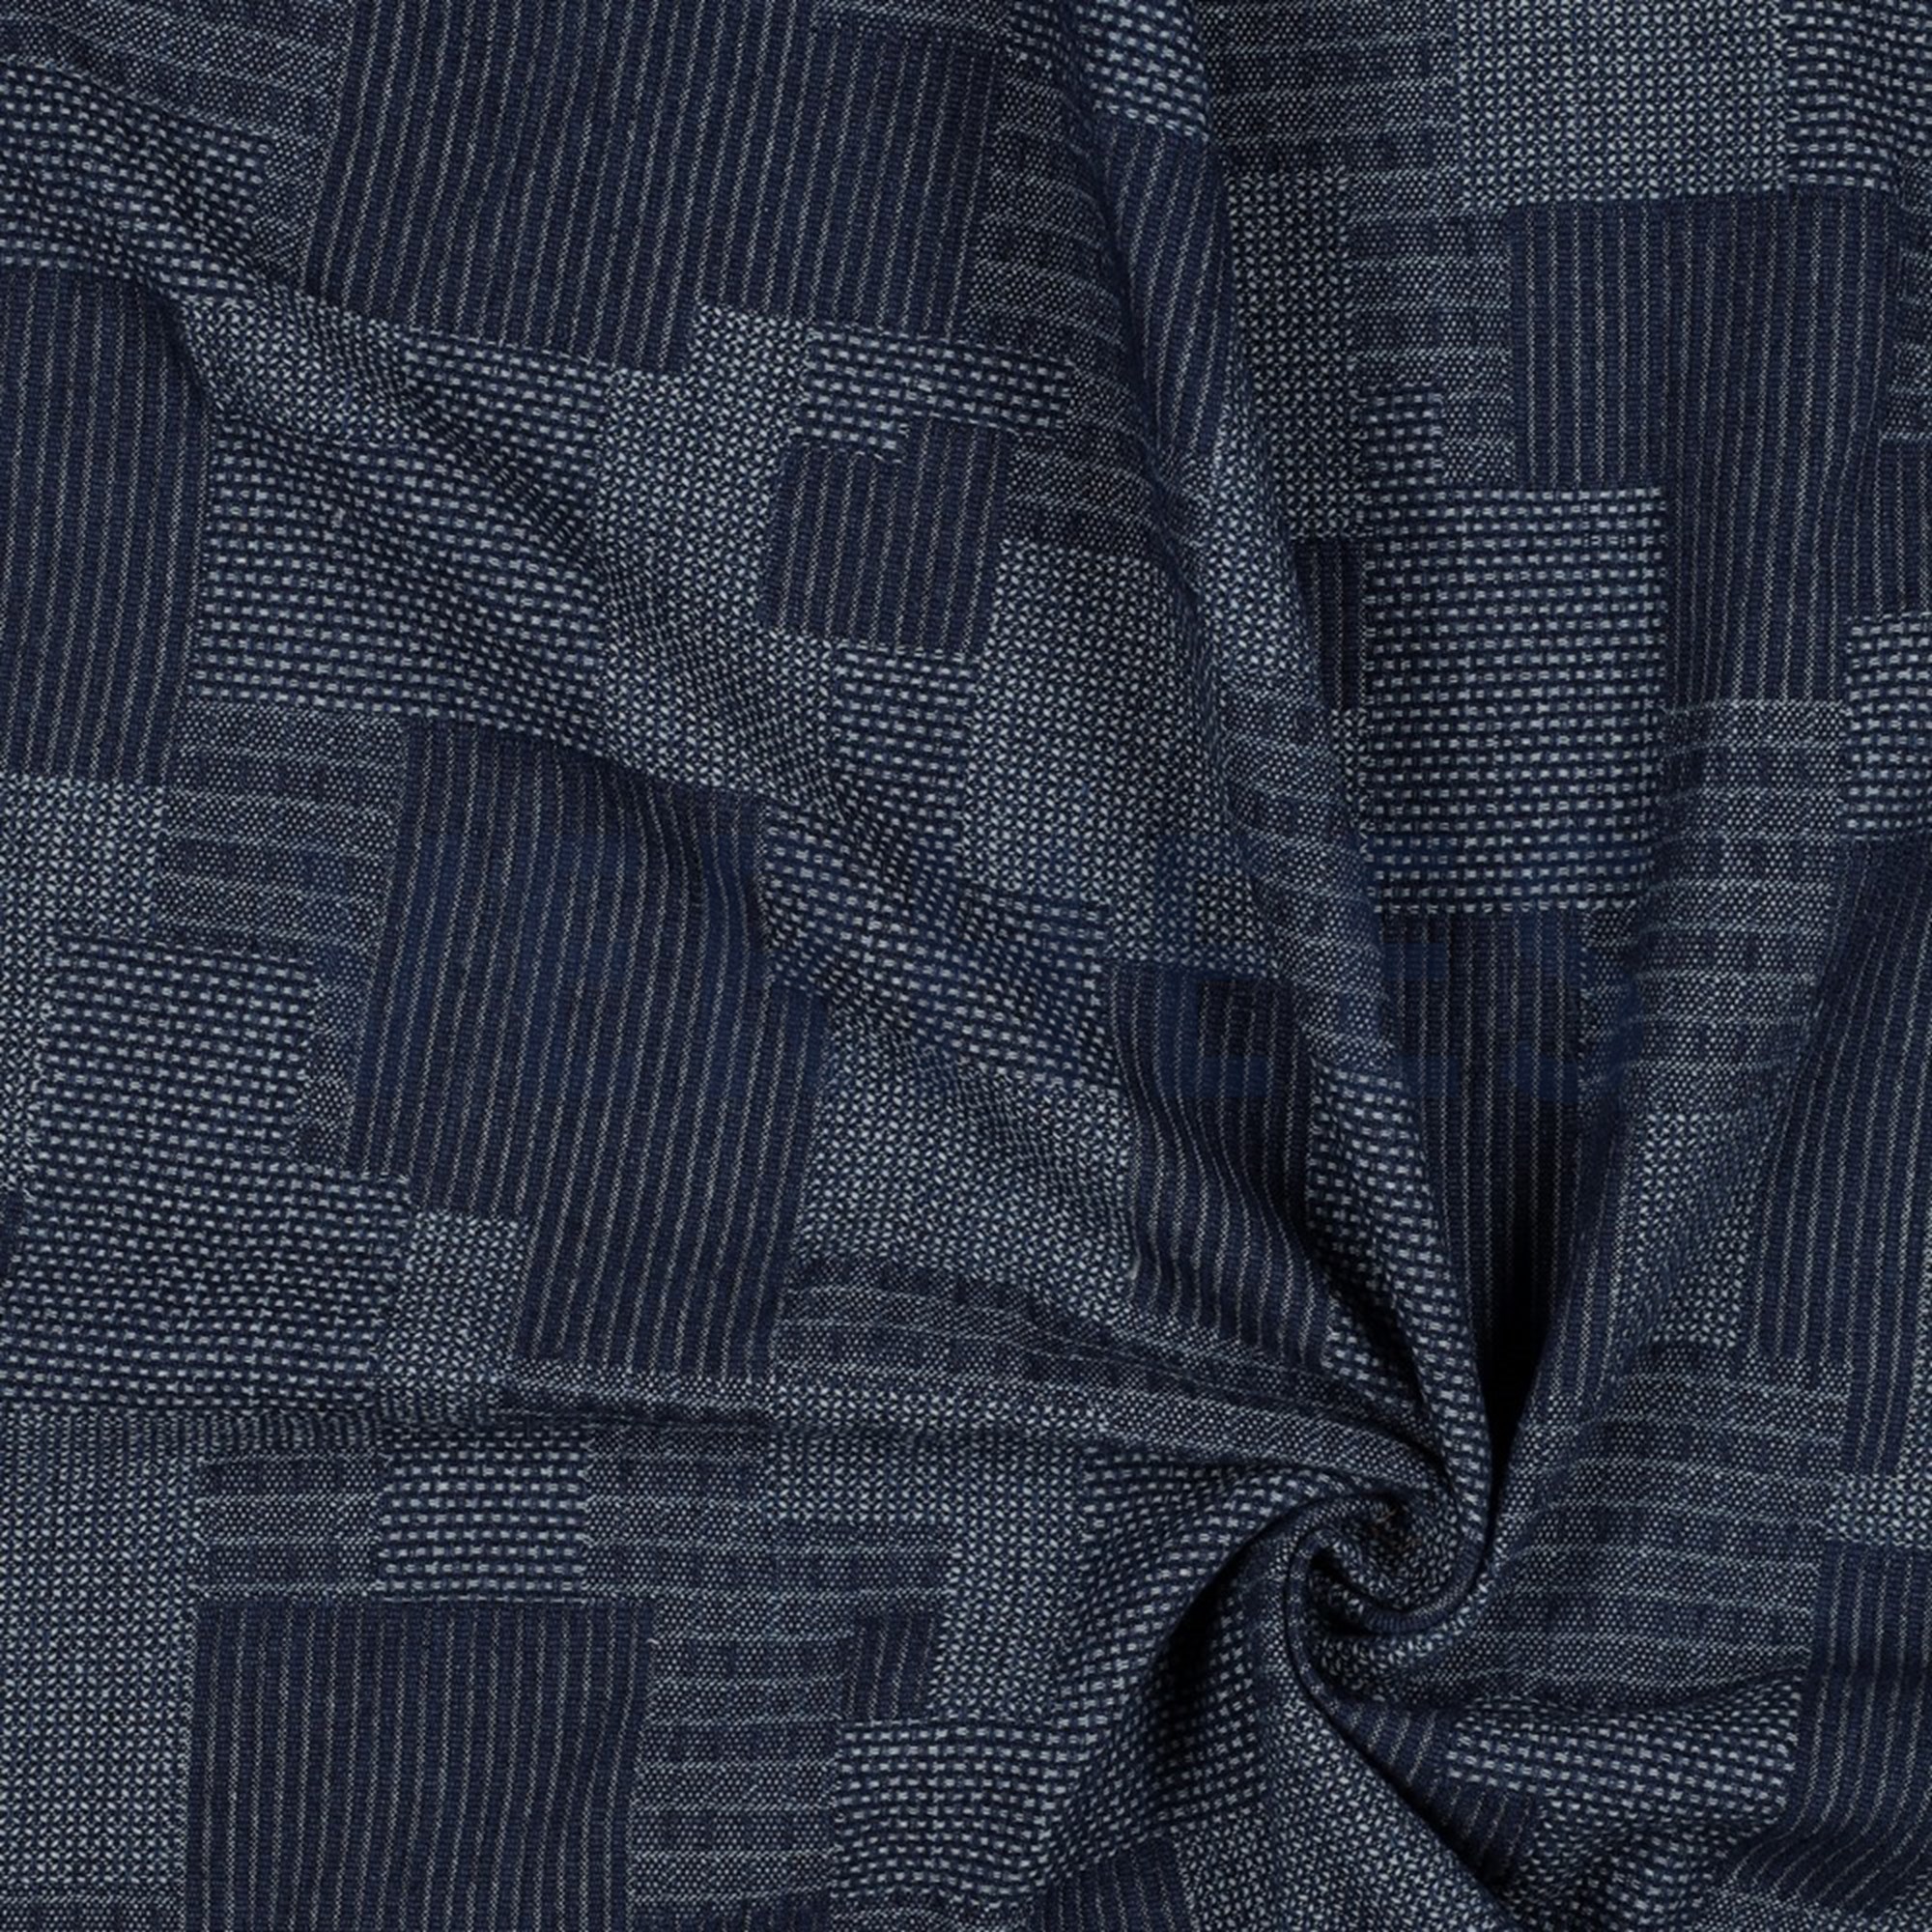 JEANS JACQUARD JEANS (high resolution) #2